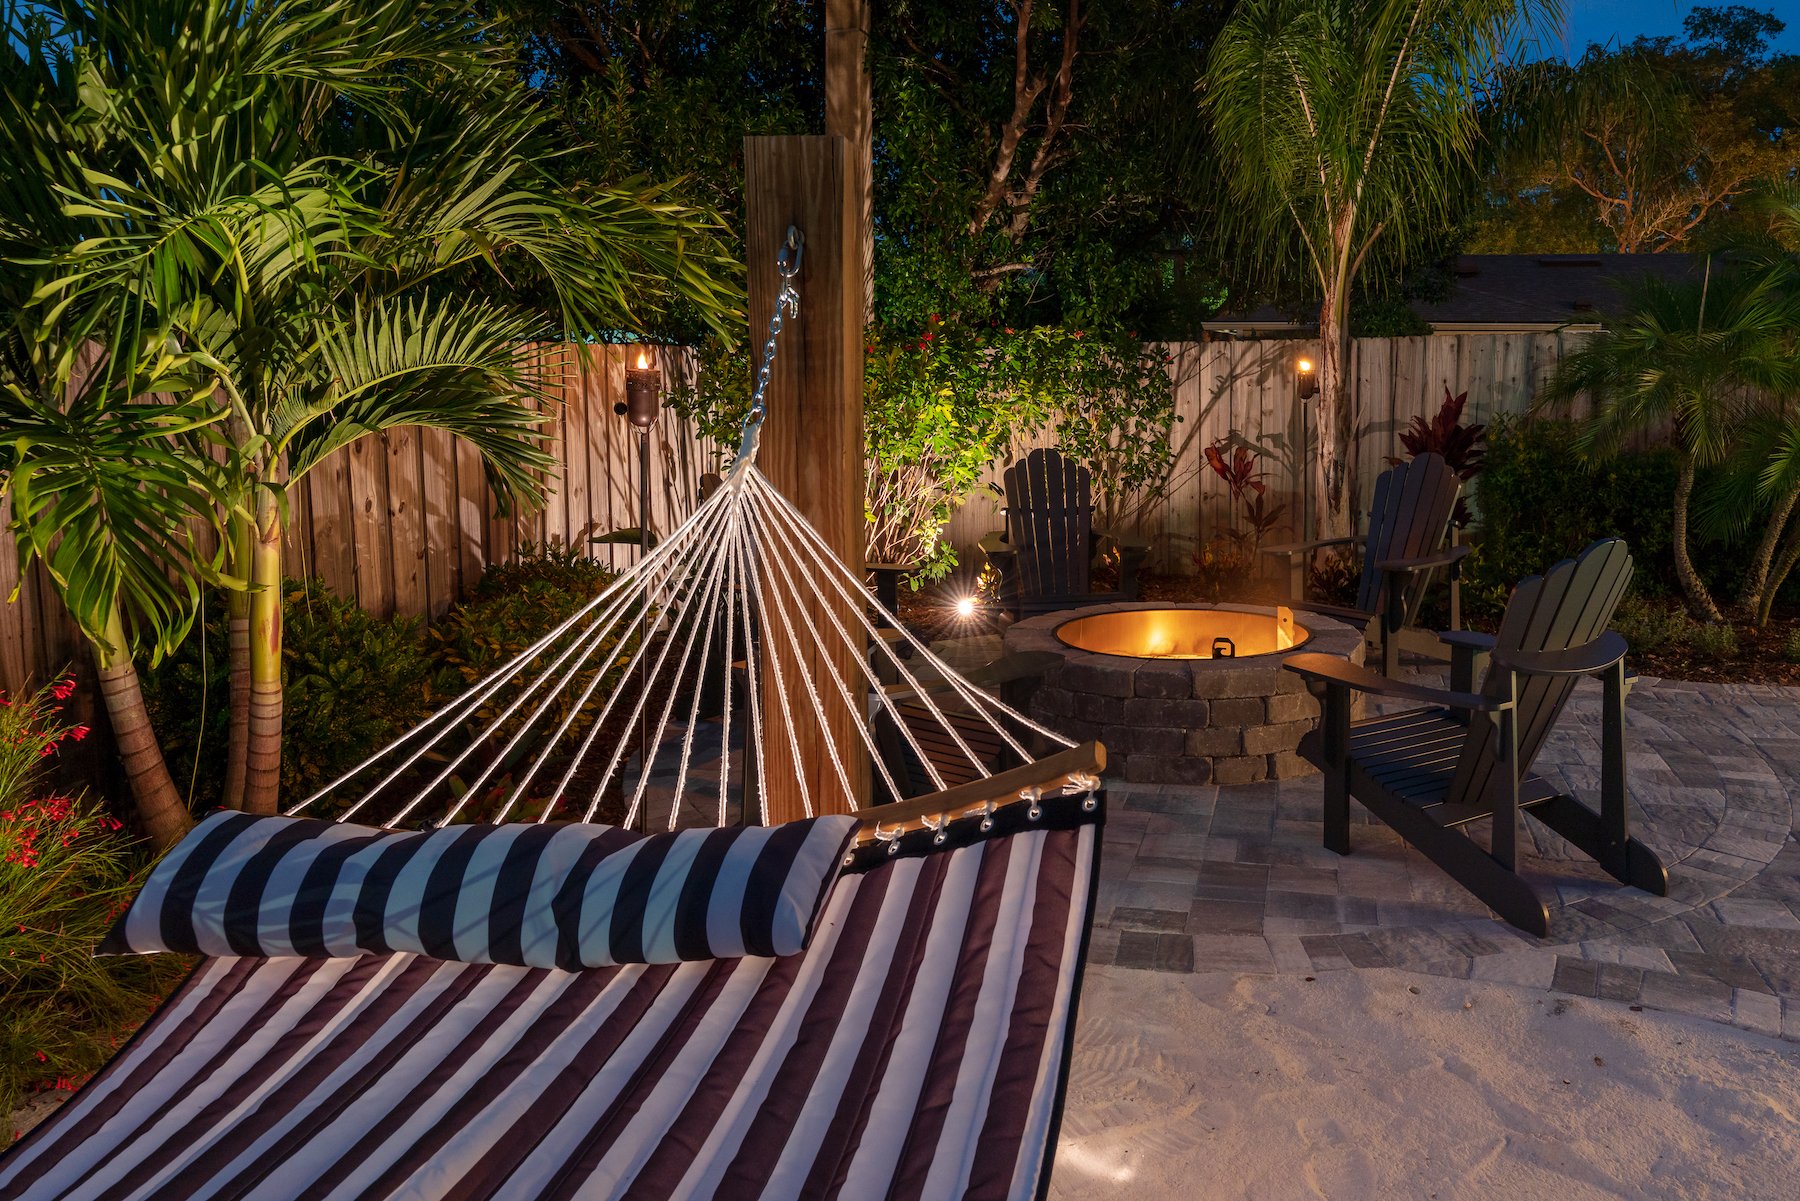 fire pit on patio with hammock